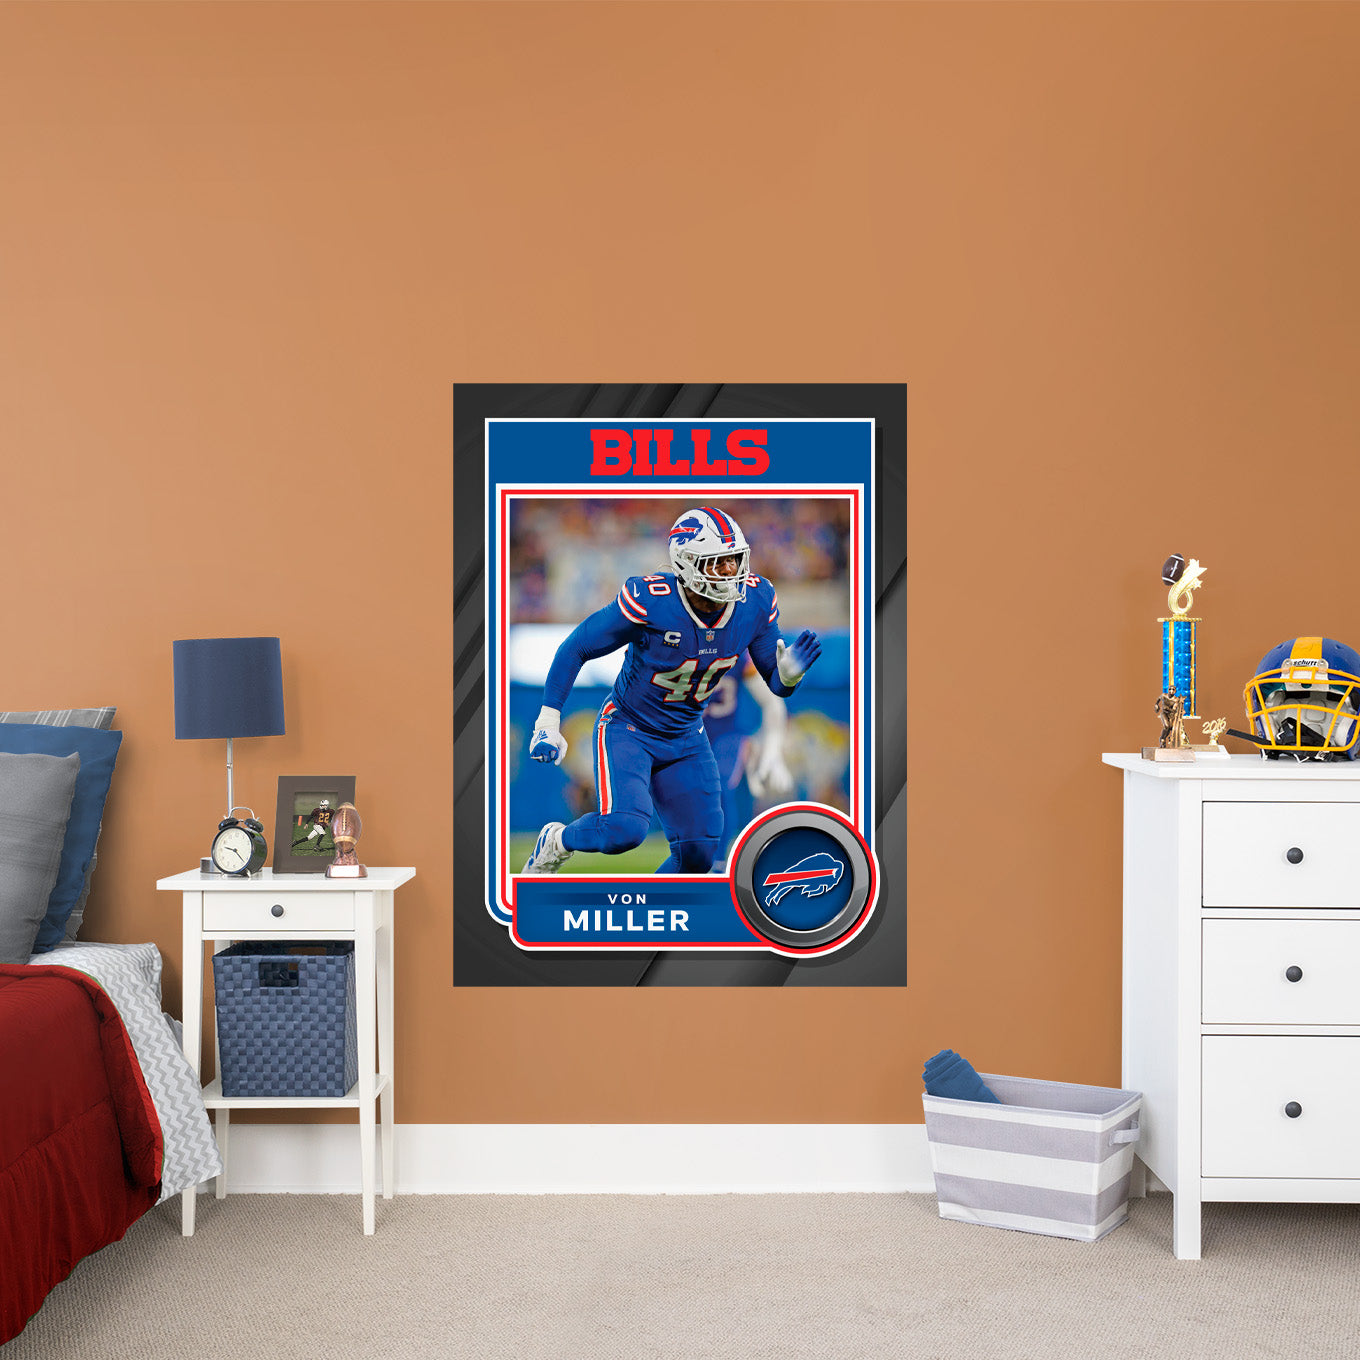 Buffalo Bills: Von Miller Poster - Officially Licensed NFL Removable Adhesive Decal